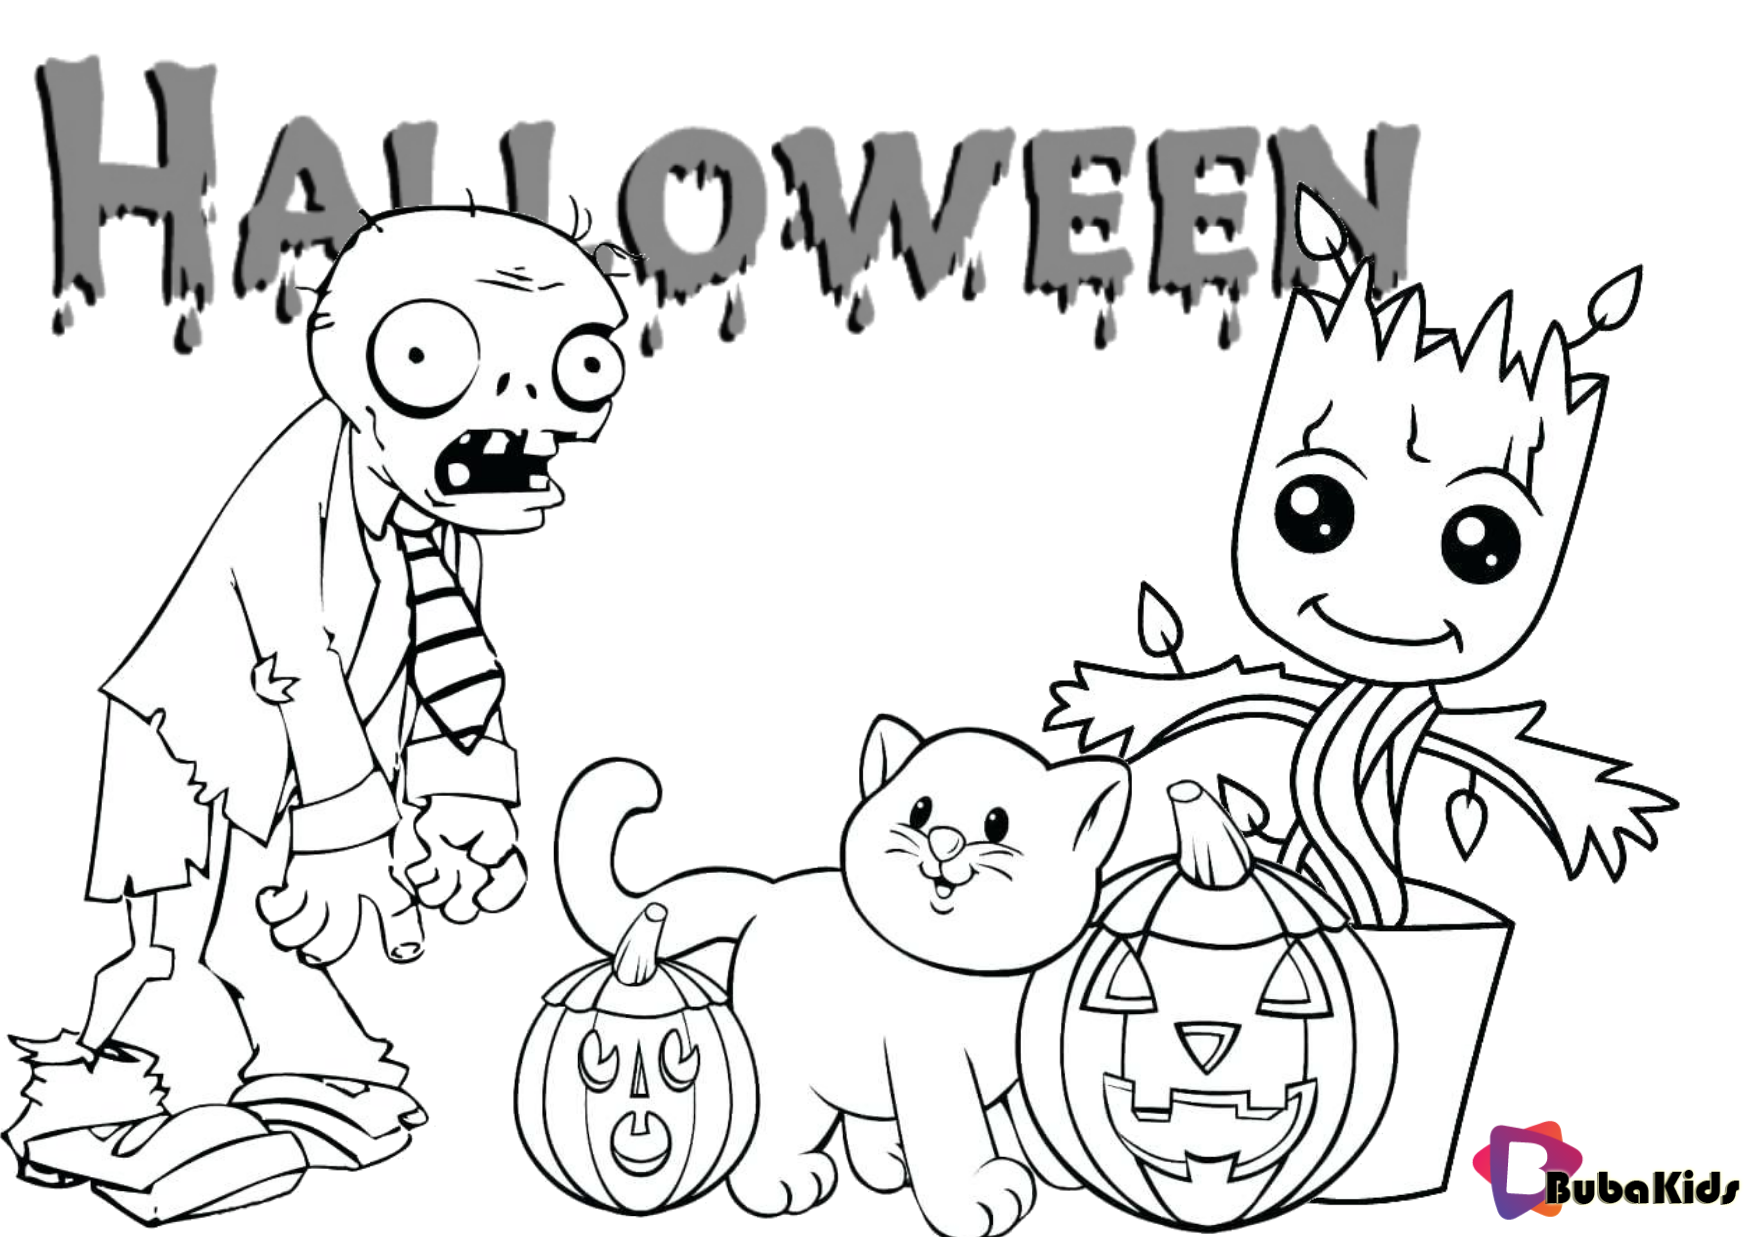 Zombie, plant and cat halloween 2019 printable coloring pages. Wallpaper